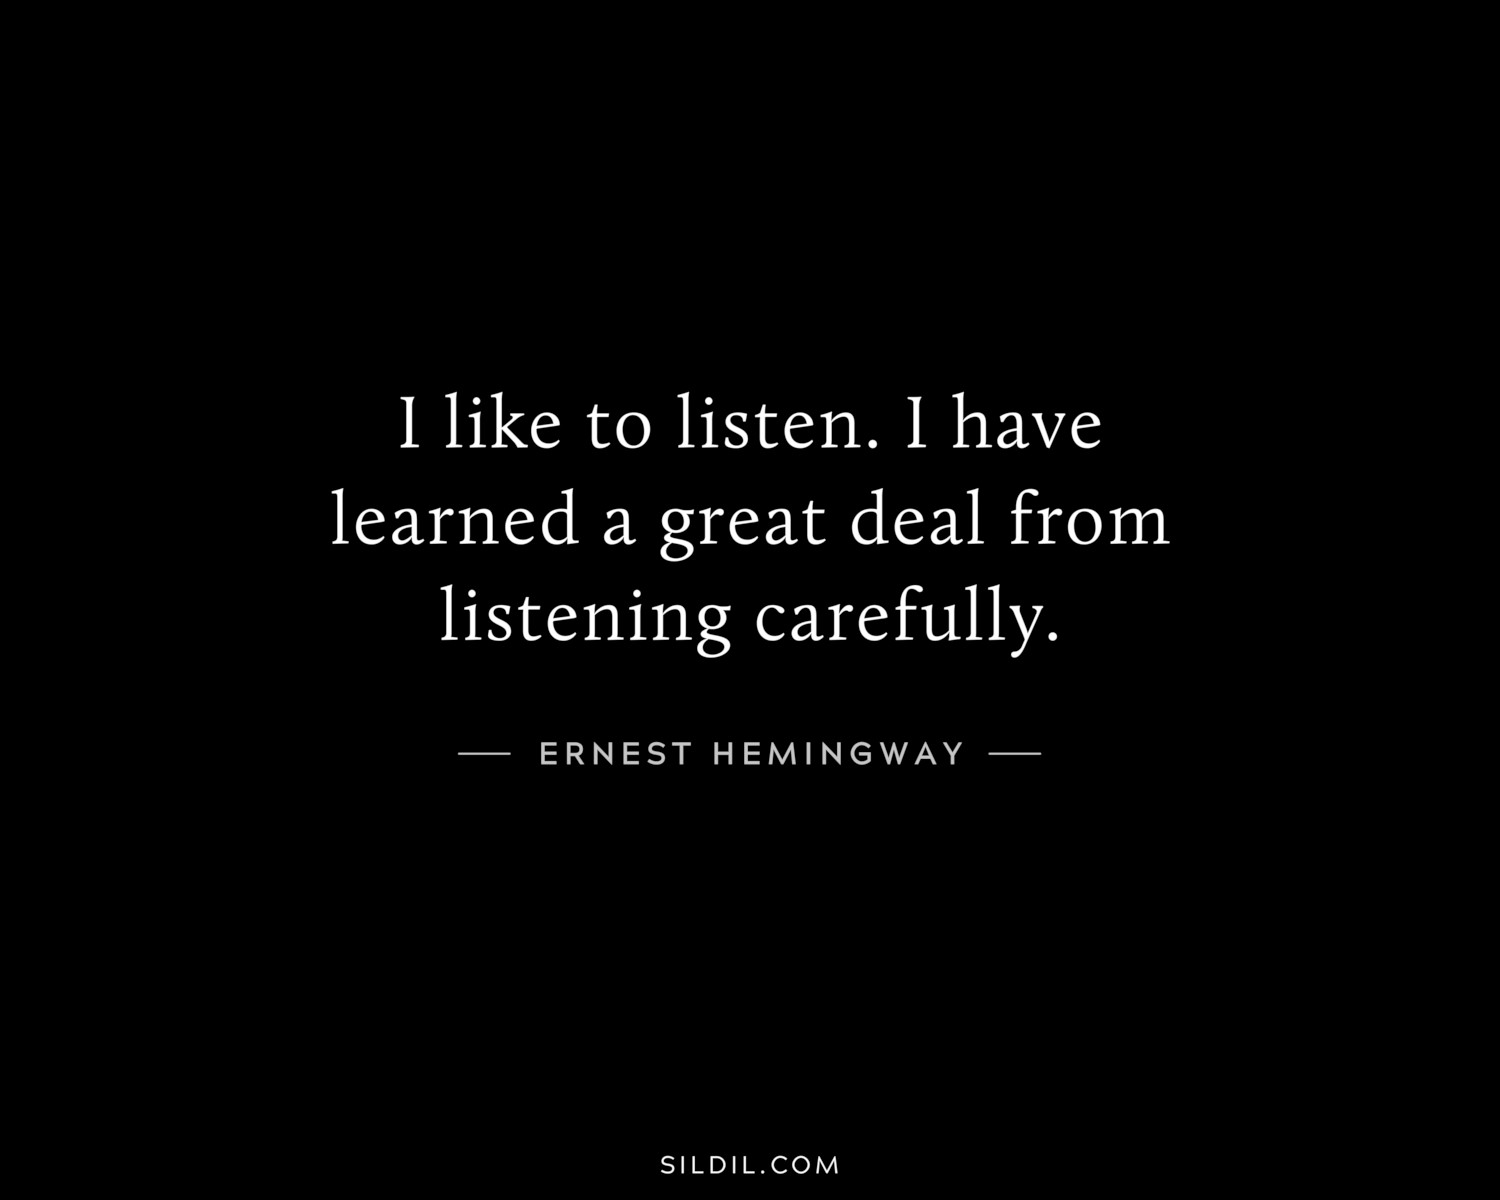 I like to listen. I have learned a great deal from listening carefully.